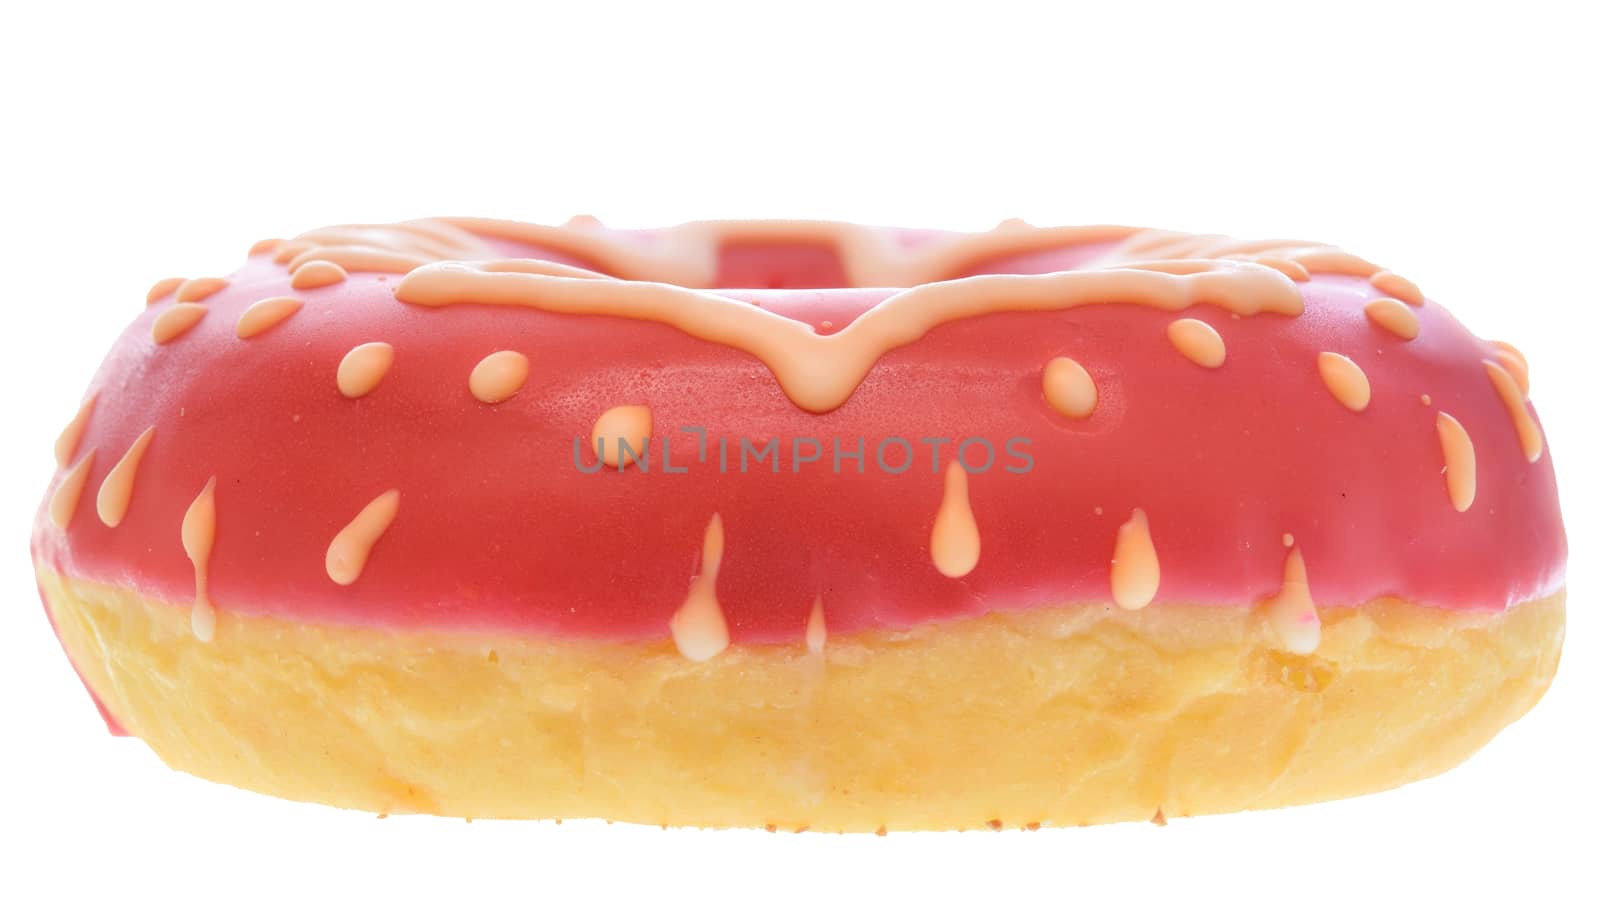 Donut in pink glaze with Christmas tree decor Isolated on a white background.